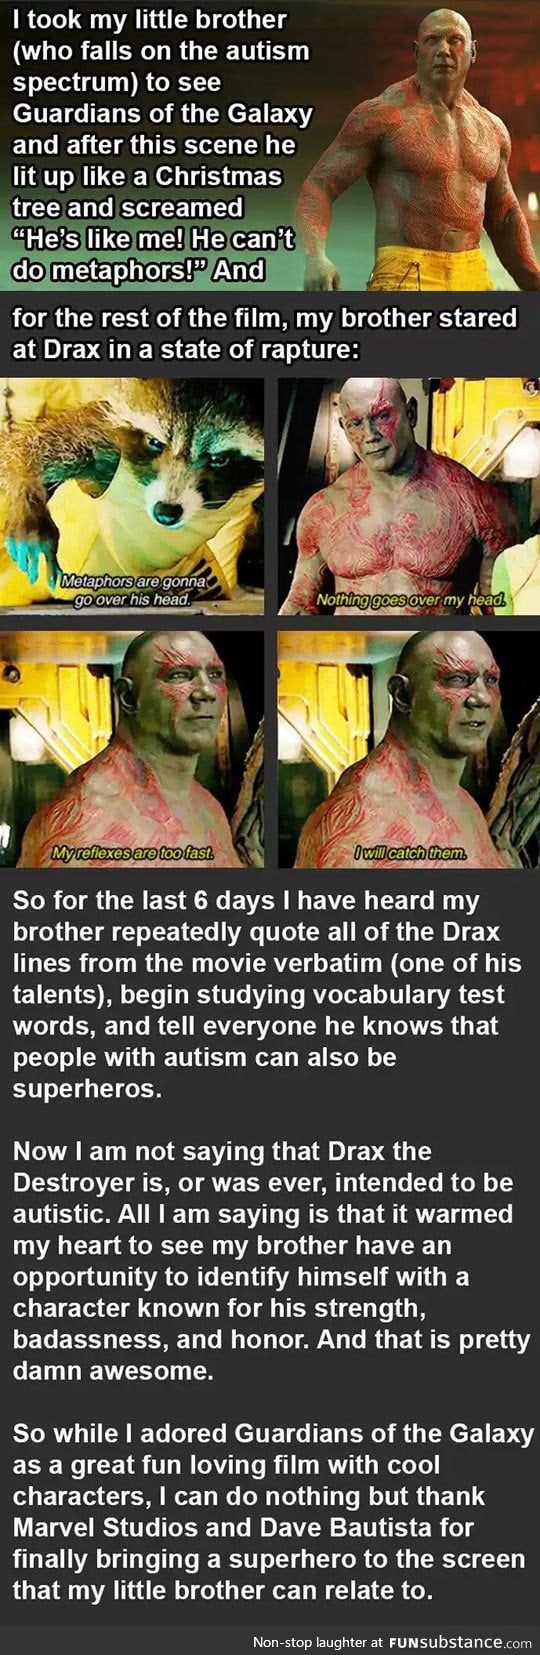 Guardians of the galaxy helps kid with autism